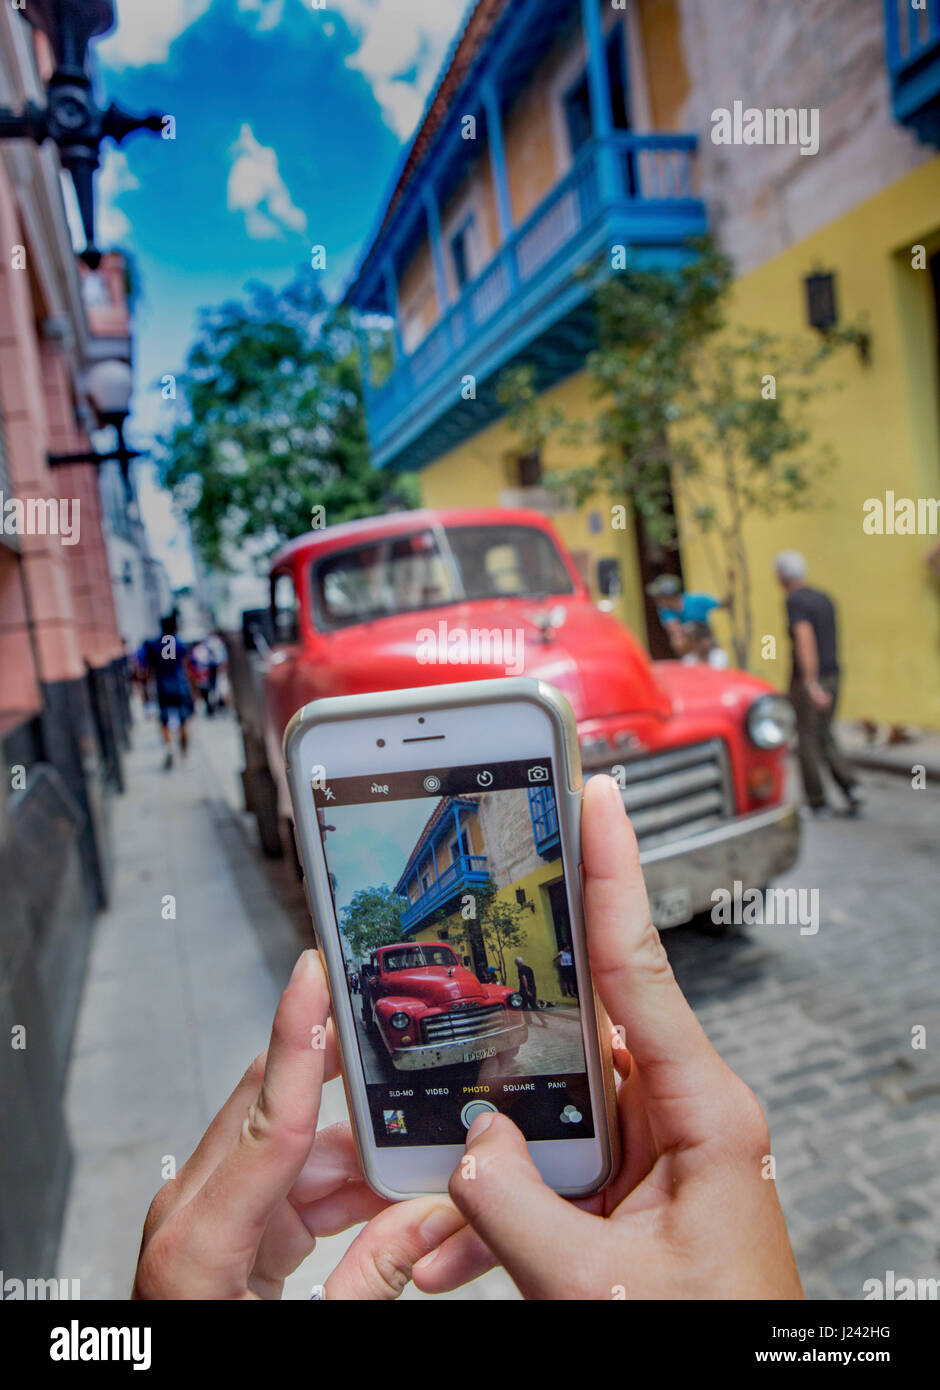 Photographer captures picture of person taking picture of vintage American truck using a phone Stock Photo